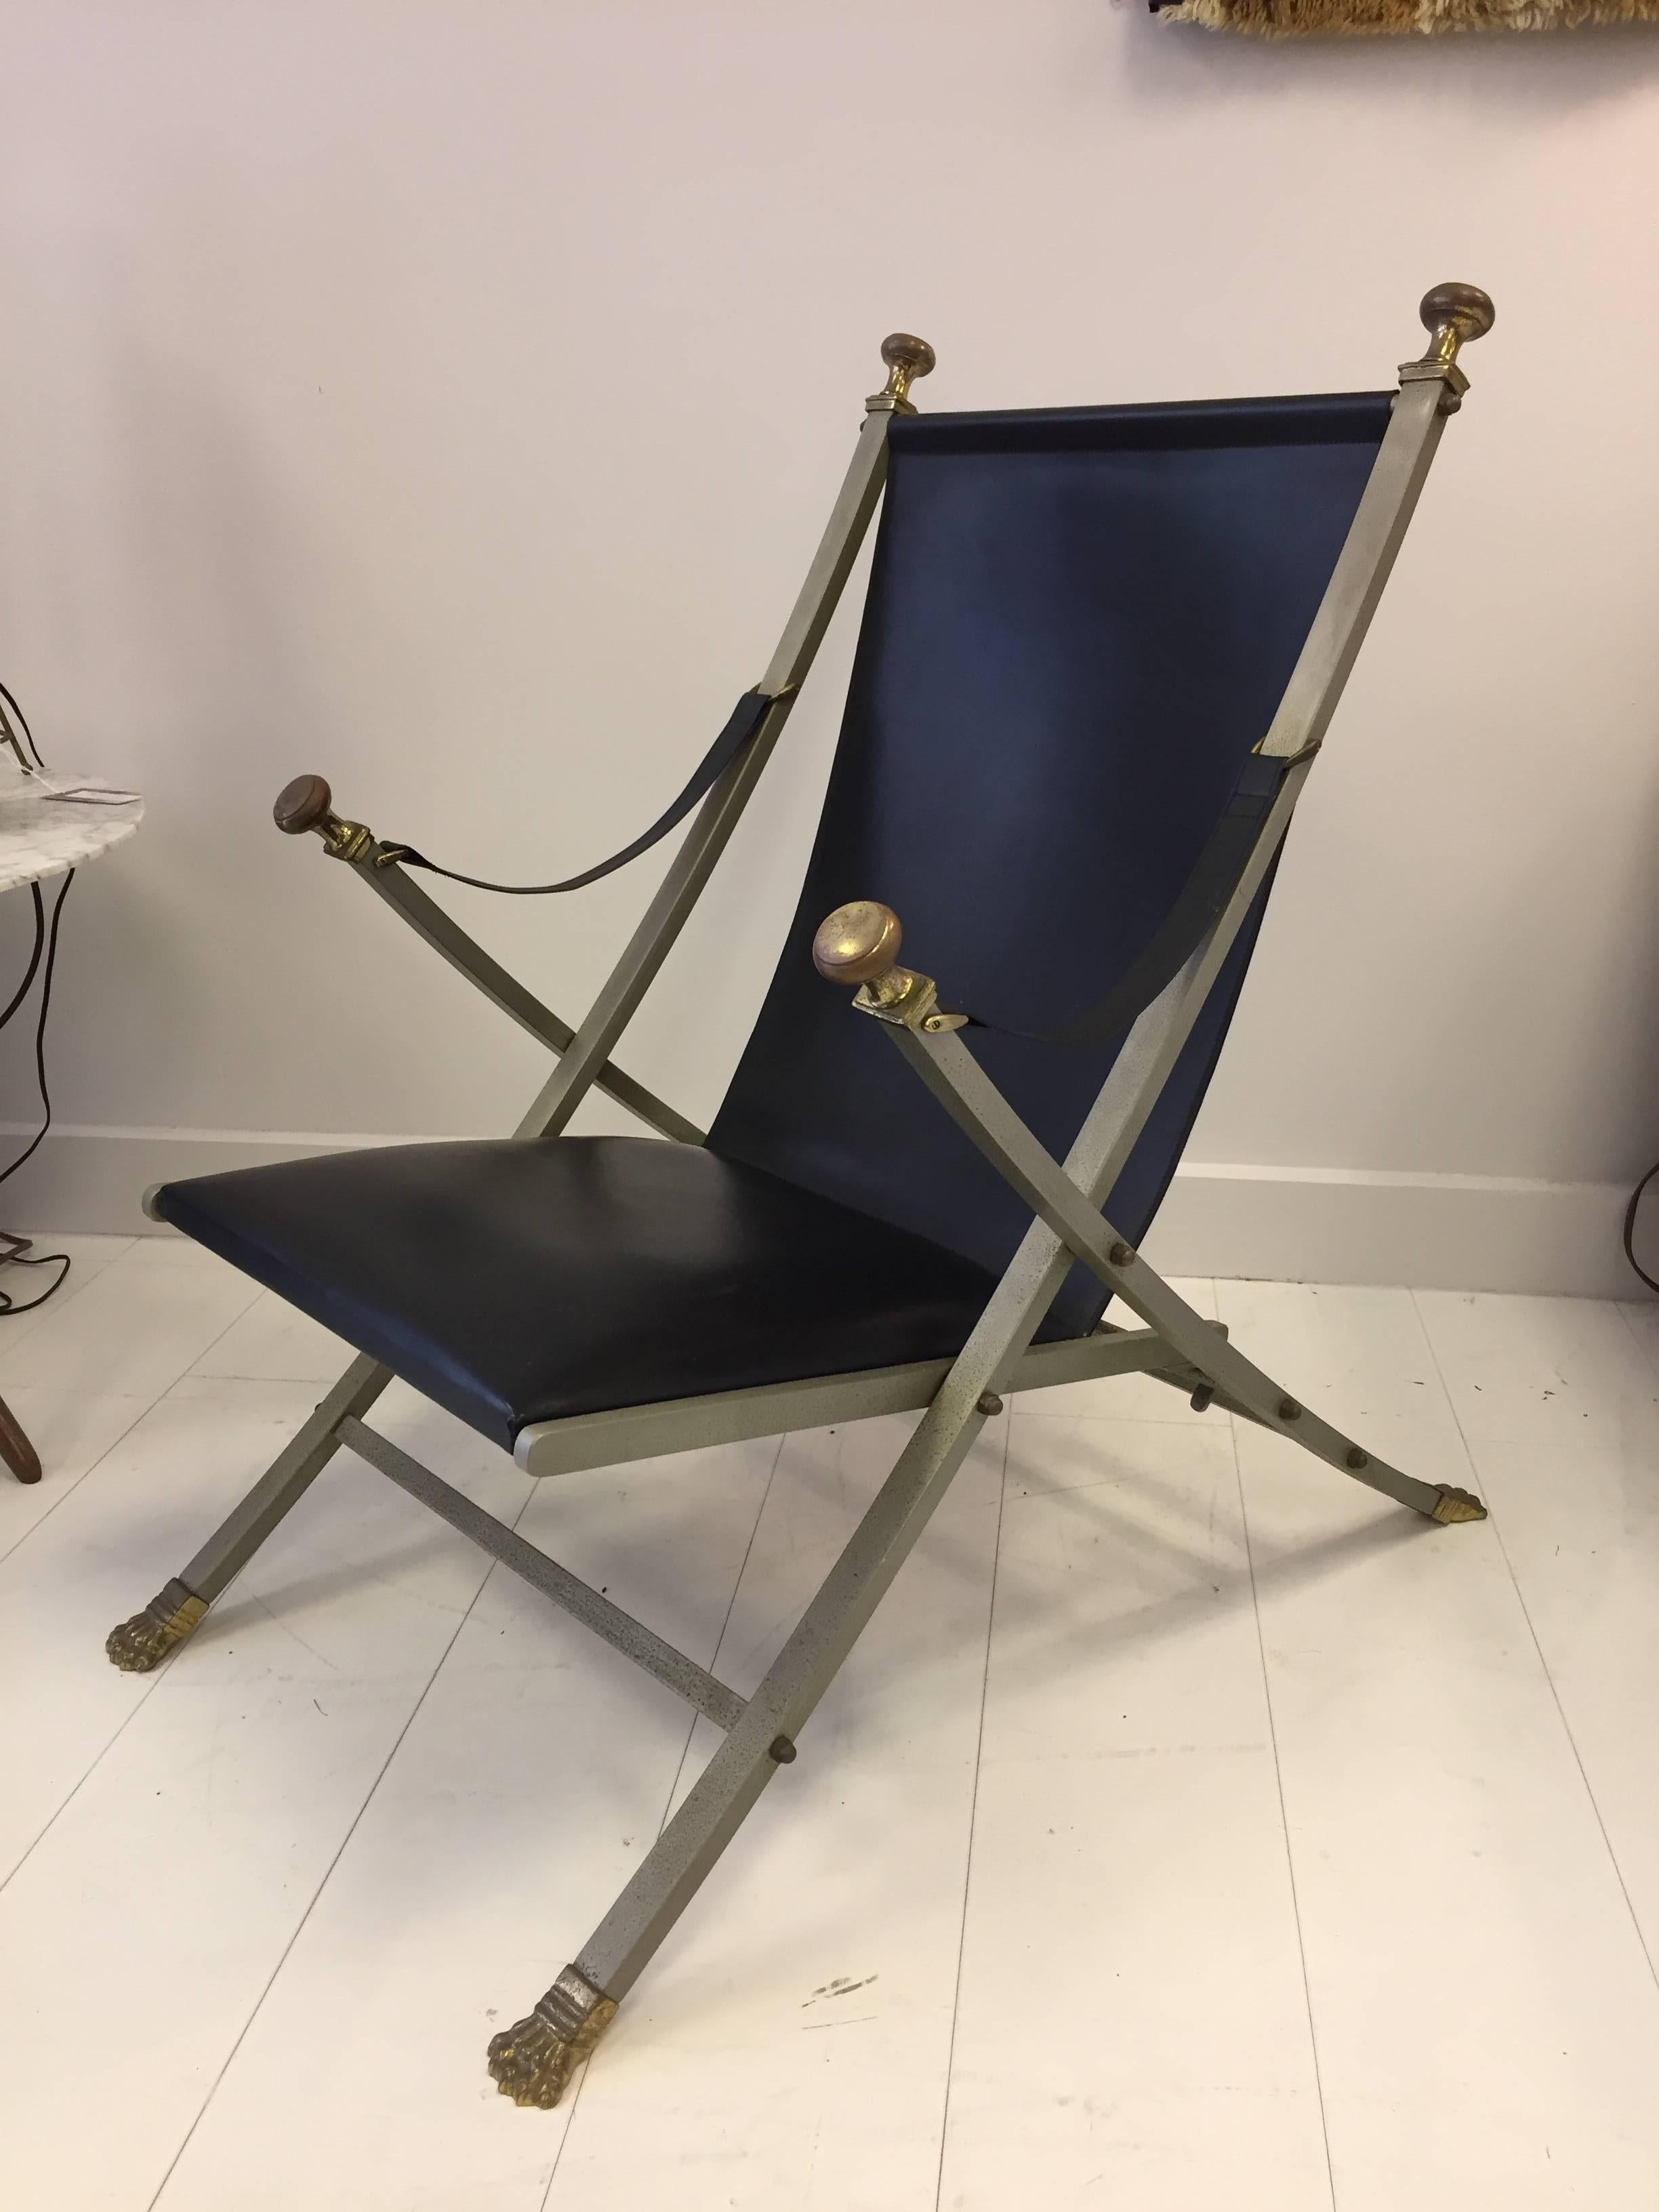 Chic folding chair with neoclassical styling. Leather seat and arm straps, with solid flat bar steel frame and bronze paw feet and knob handles. Produced in Italy in the style of Maison Jansen.